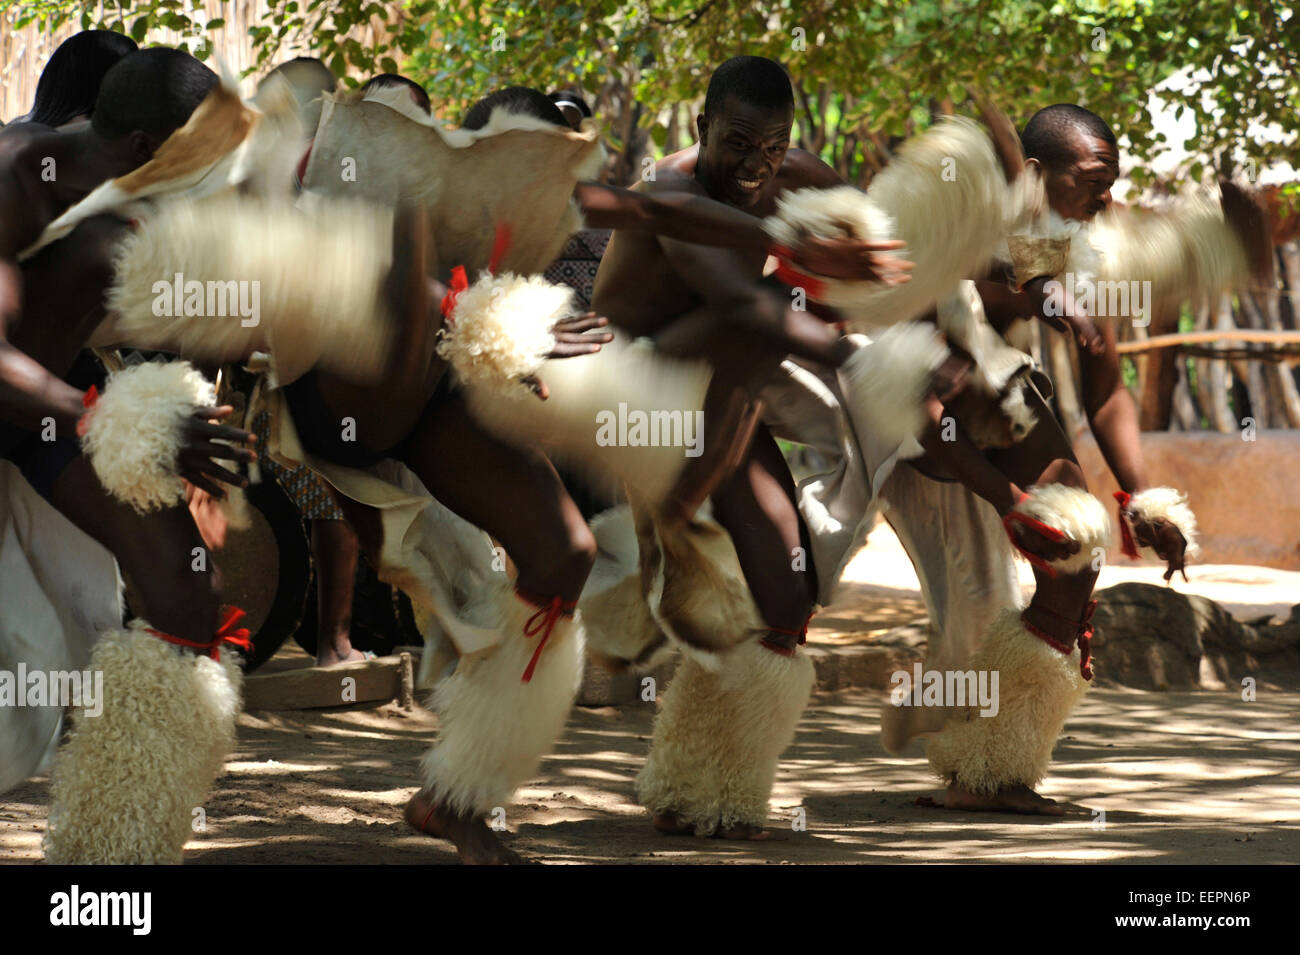 Group of male Swazi dancers performing high energy war dance for tourists at Matsamo culture village, Swaziland Cultures Travel destinations Stock Photo